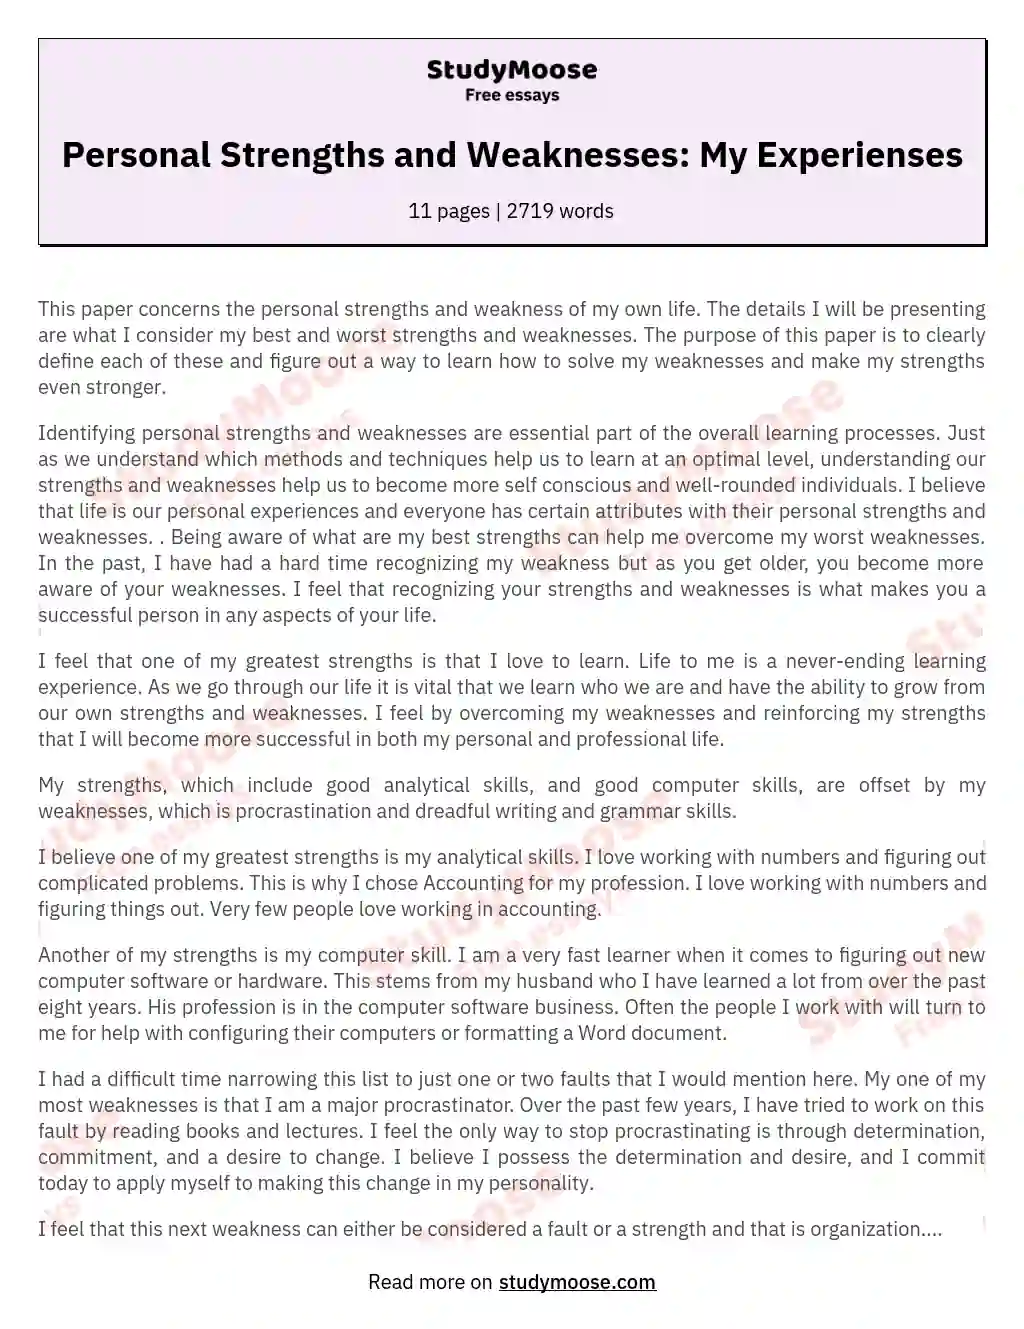 Personal Strengths and Weaknesses: My Experienses